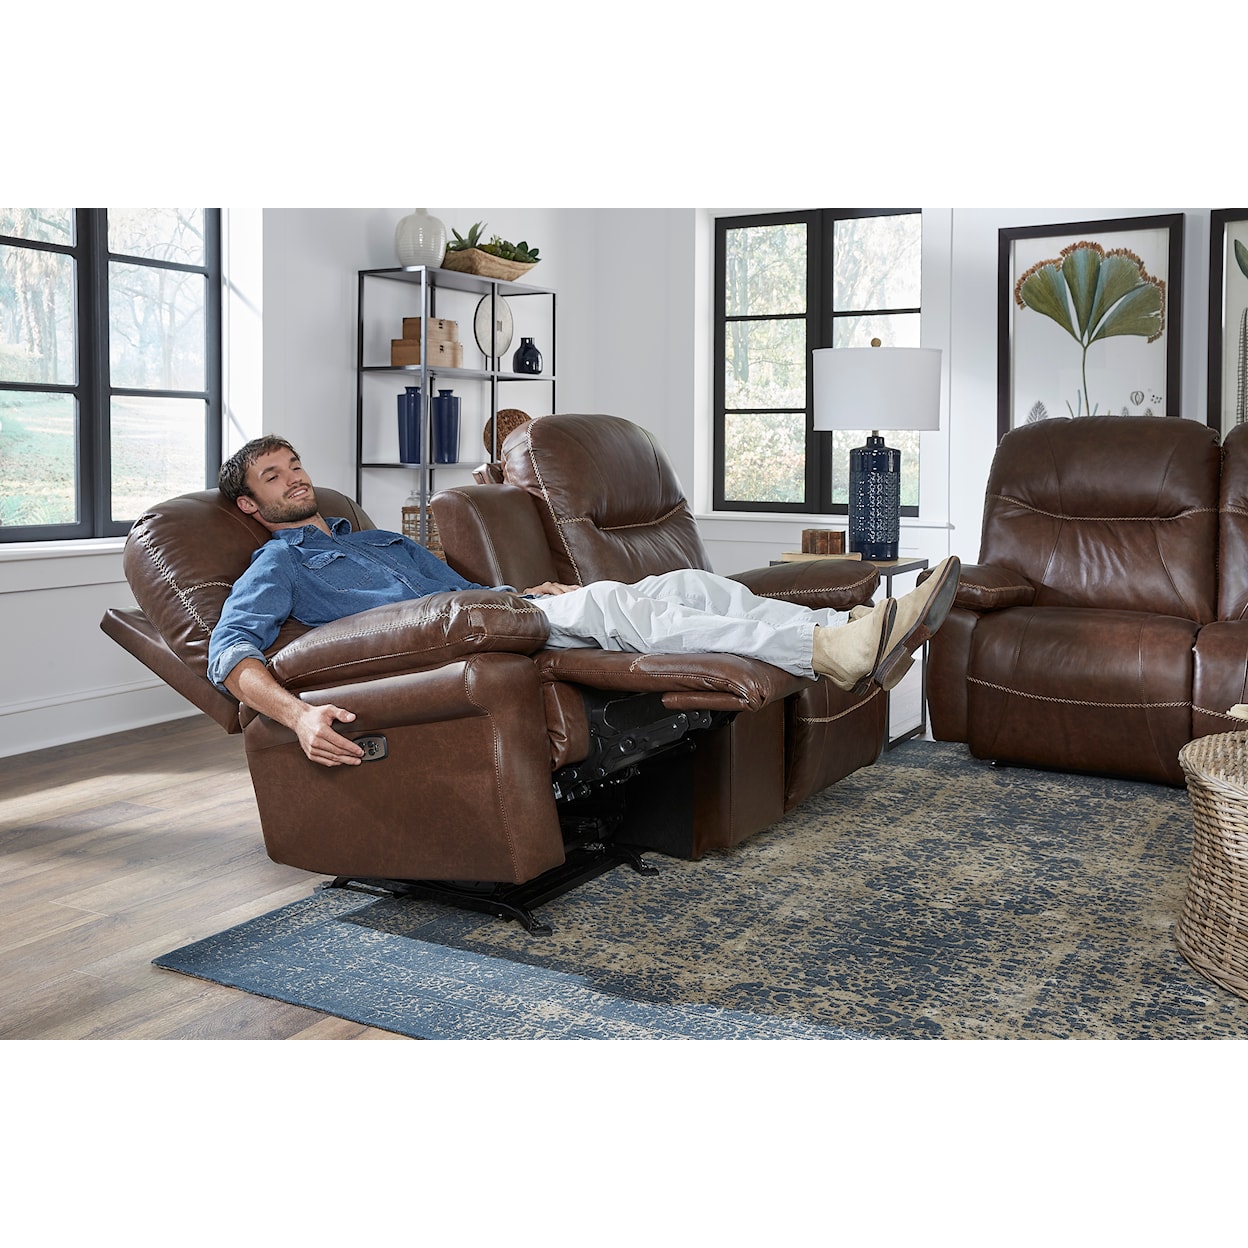 Best Home Furnishings Leya Power Space Saver Console Reclining Loveseat